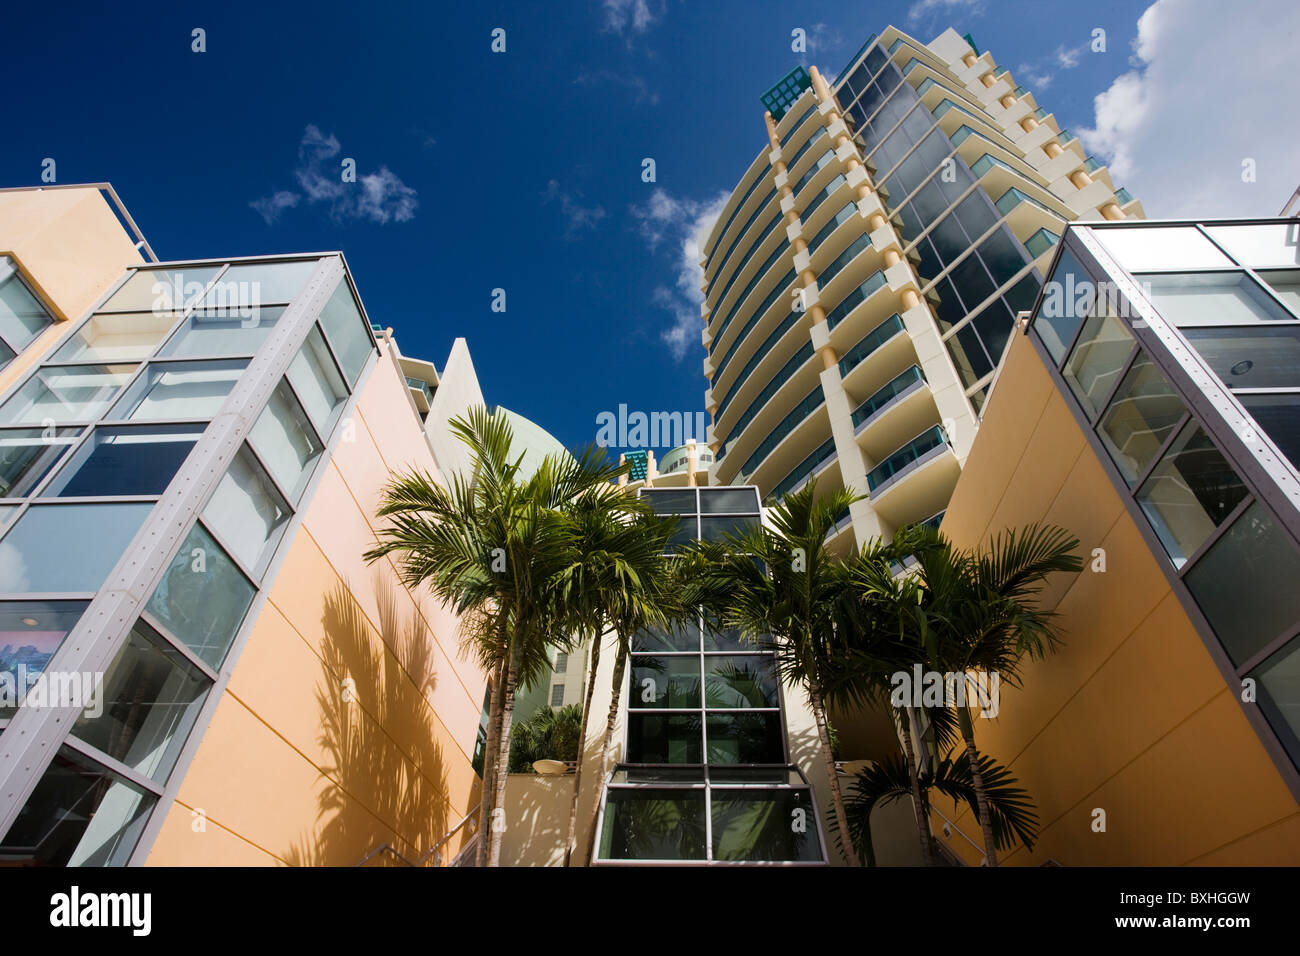 Art deco architecture, in pastel colors high rise apartment blocks at South Beach, Miami, Florida, United States of America Stock Photo